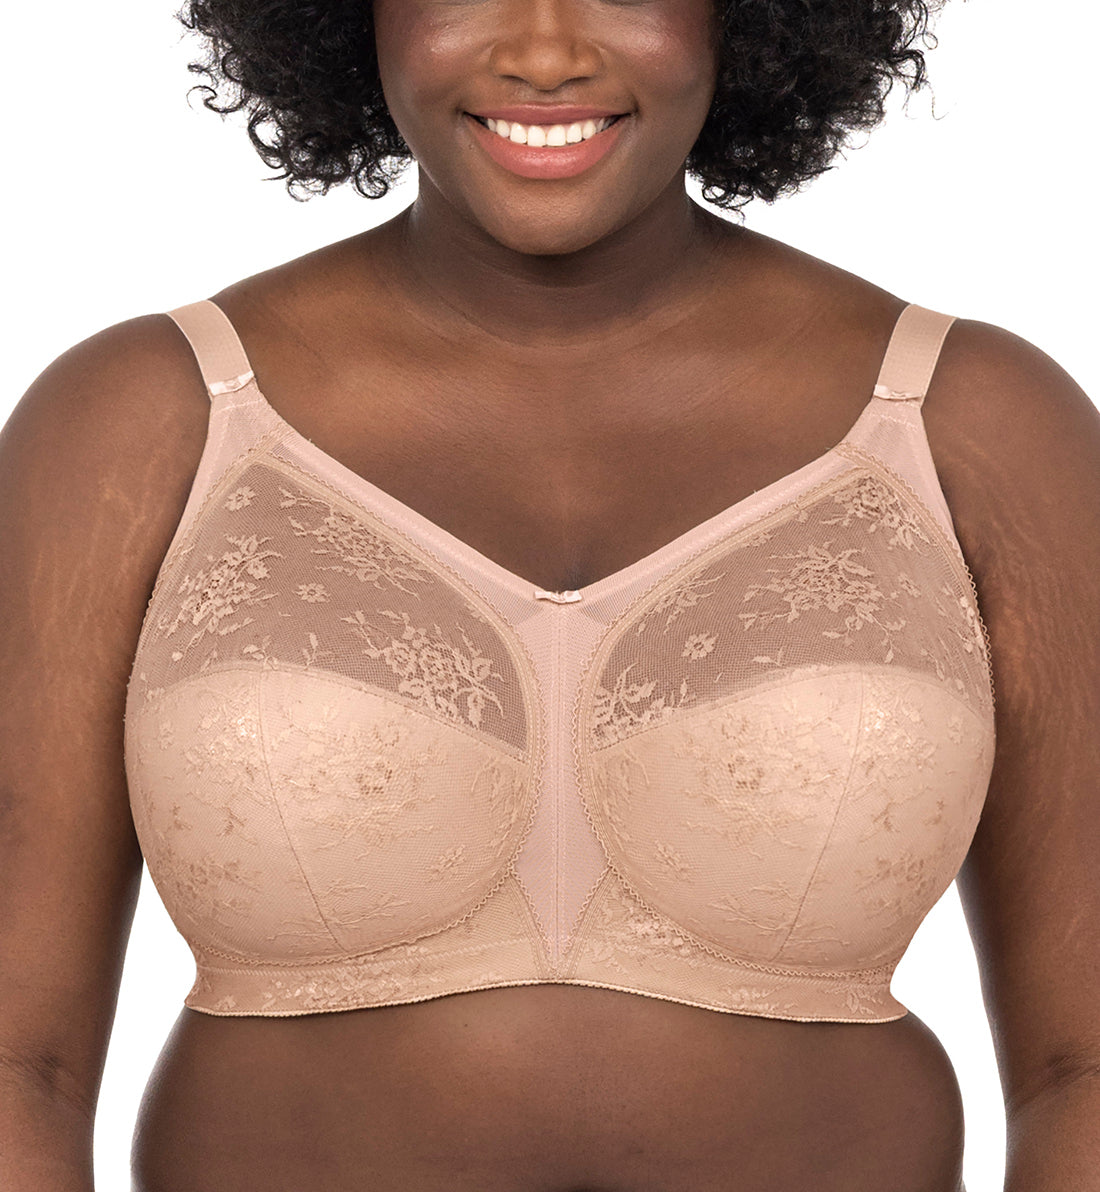 Goddess Verity Full Cup Non Wire Bra (700218),34I,Fawn - Fawn,34I